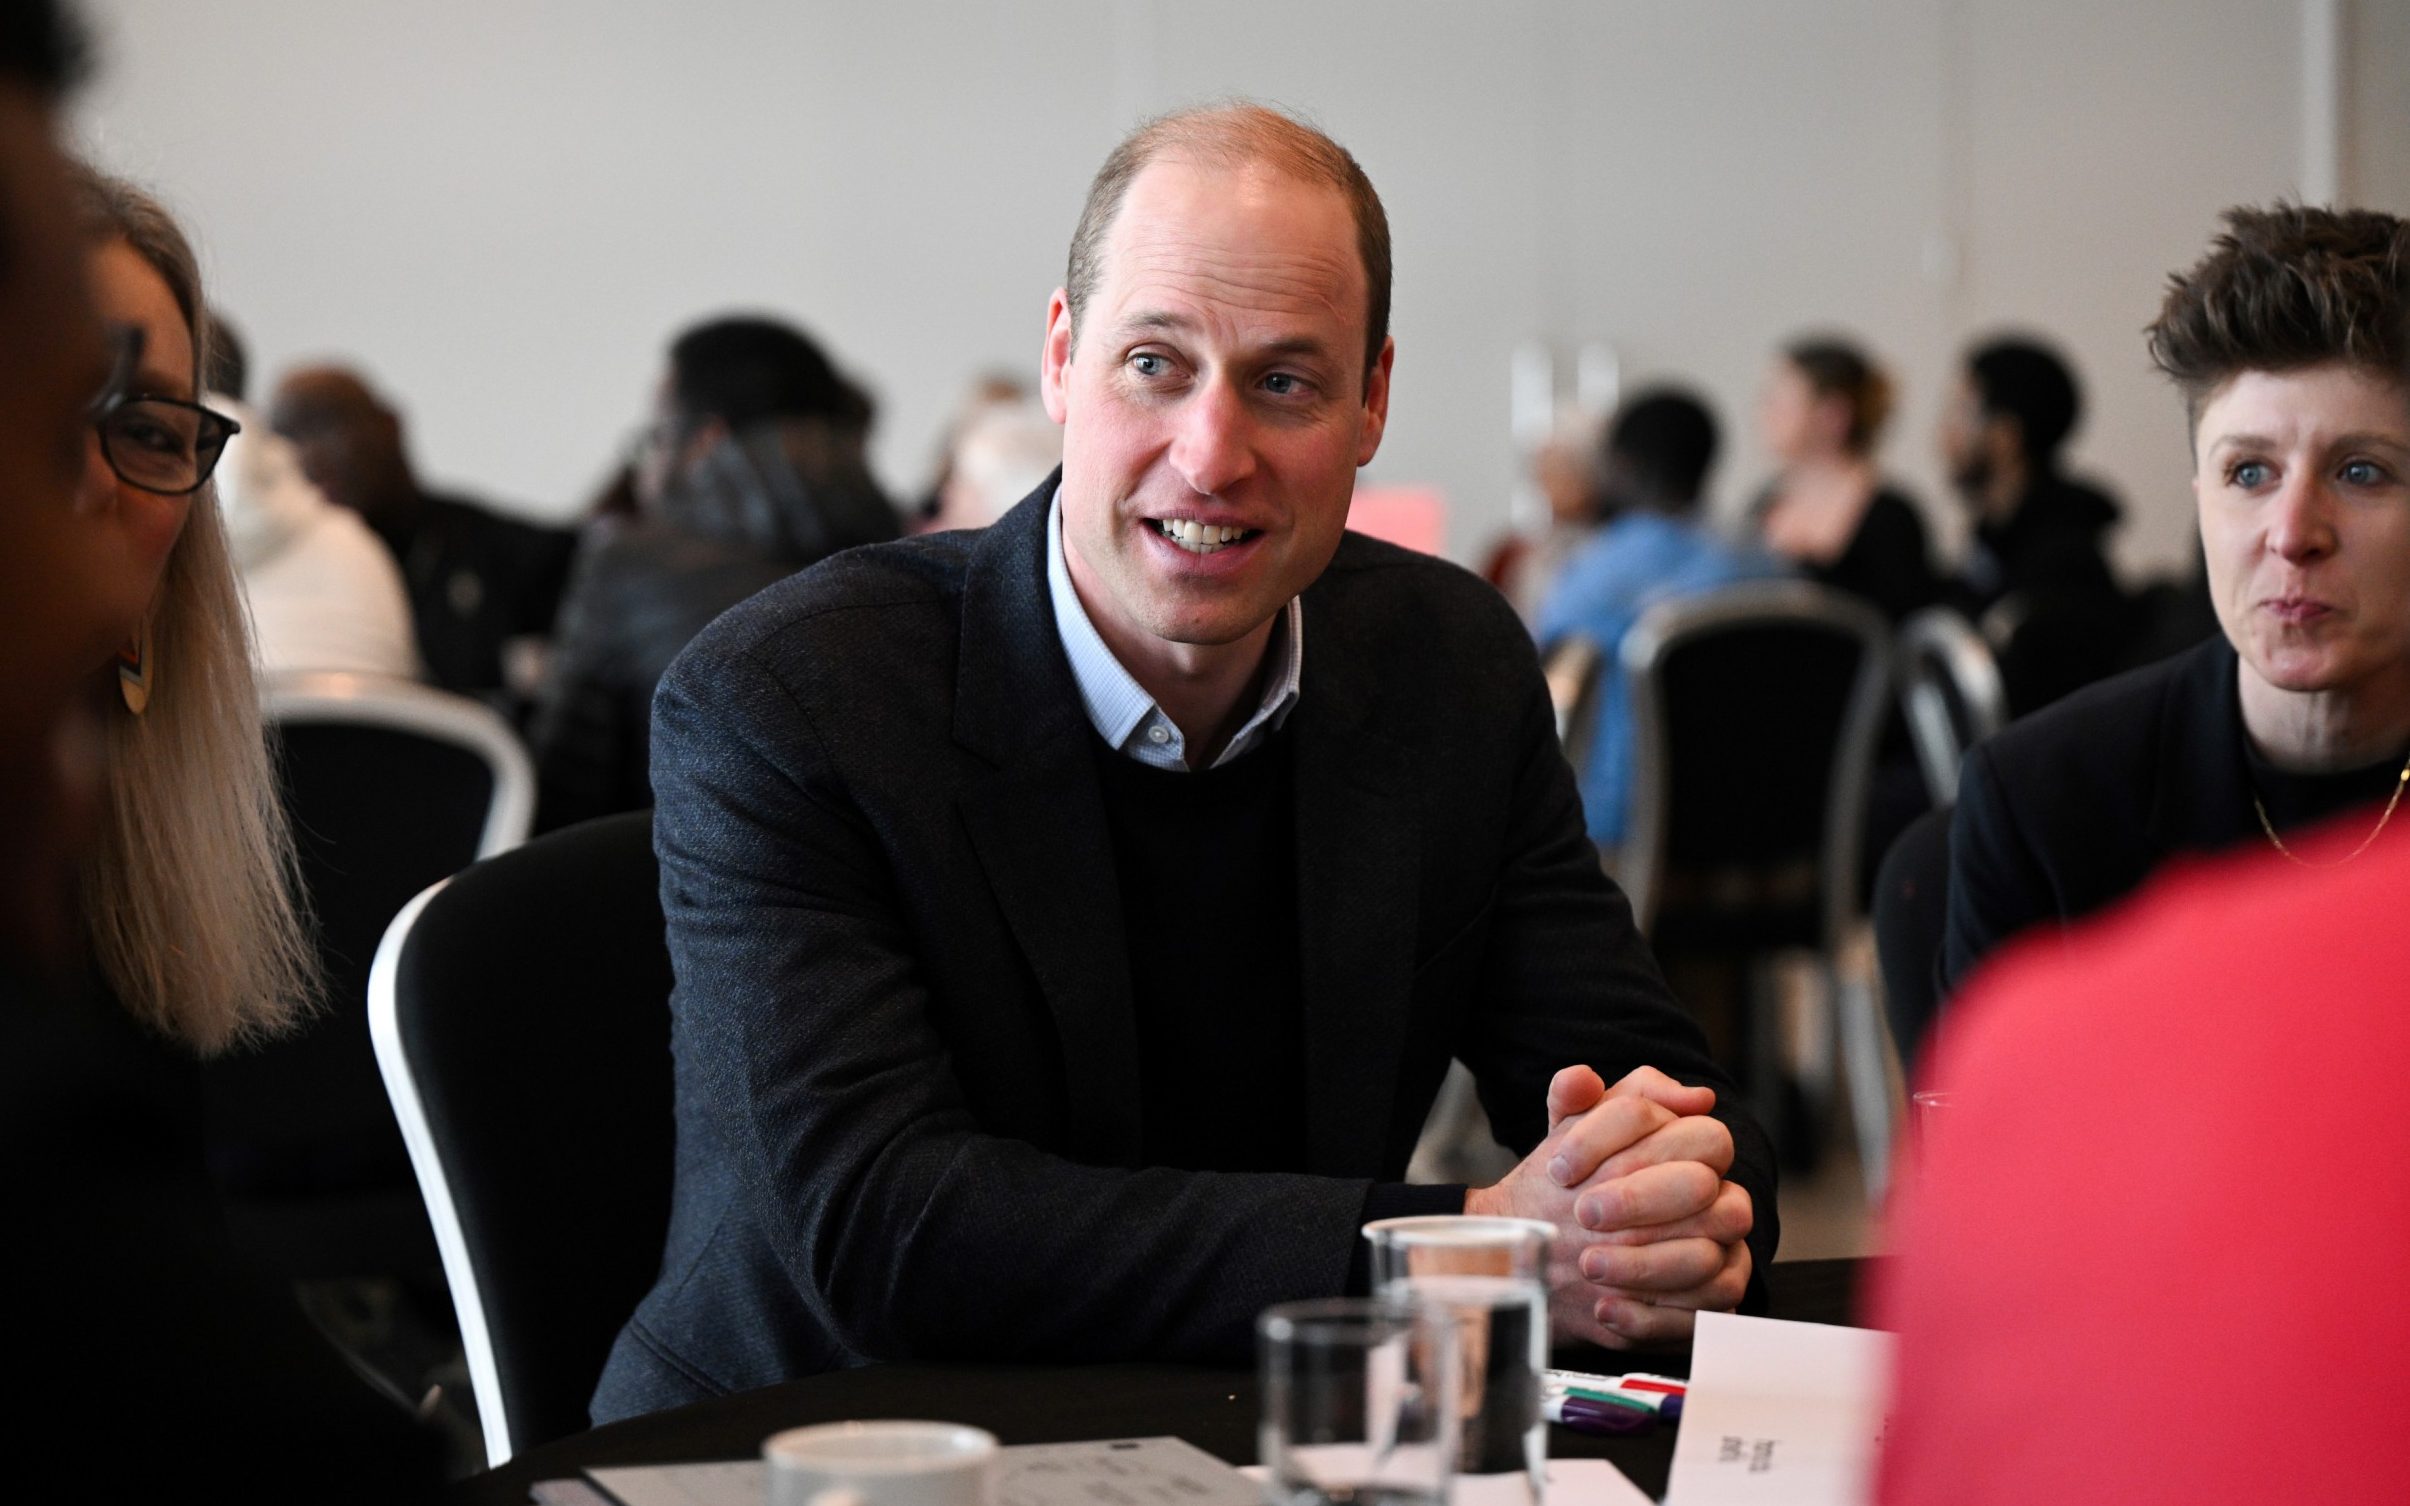 prince william reveals first public engagements since princess of wales’s cancer diagnosis